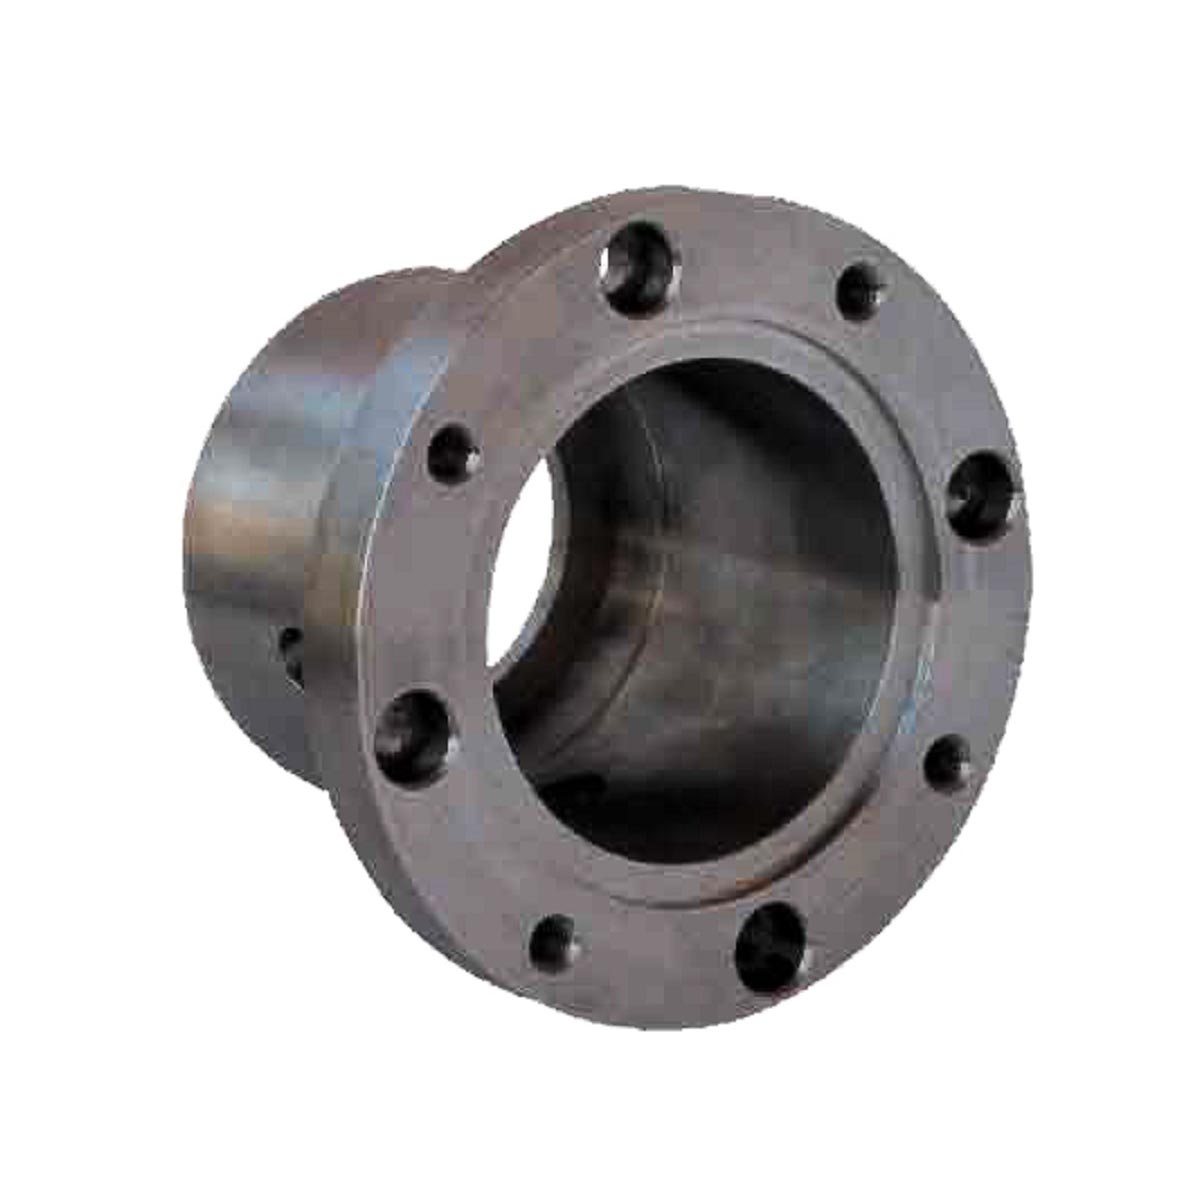 flange-china investment casting-stainless steel